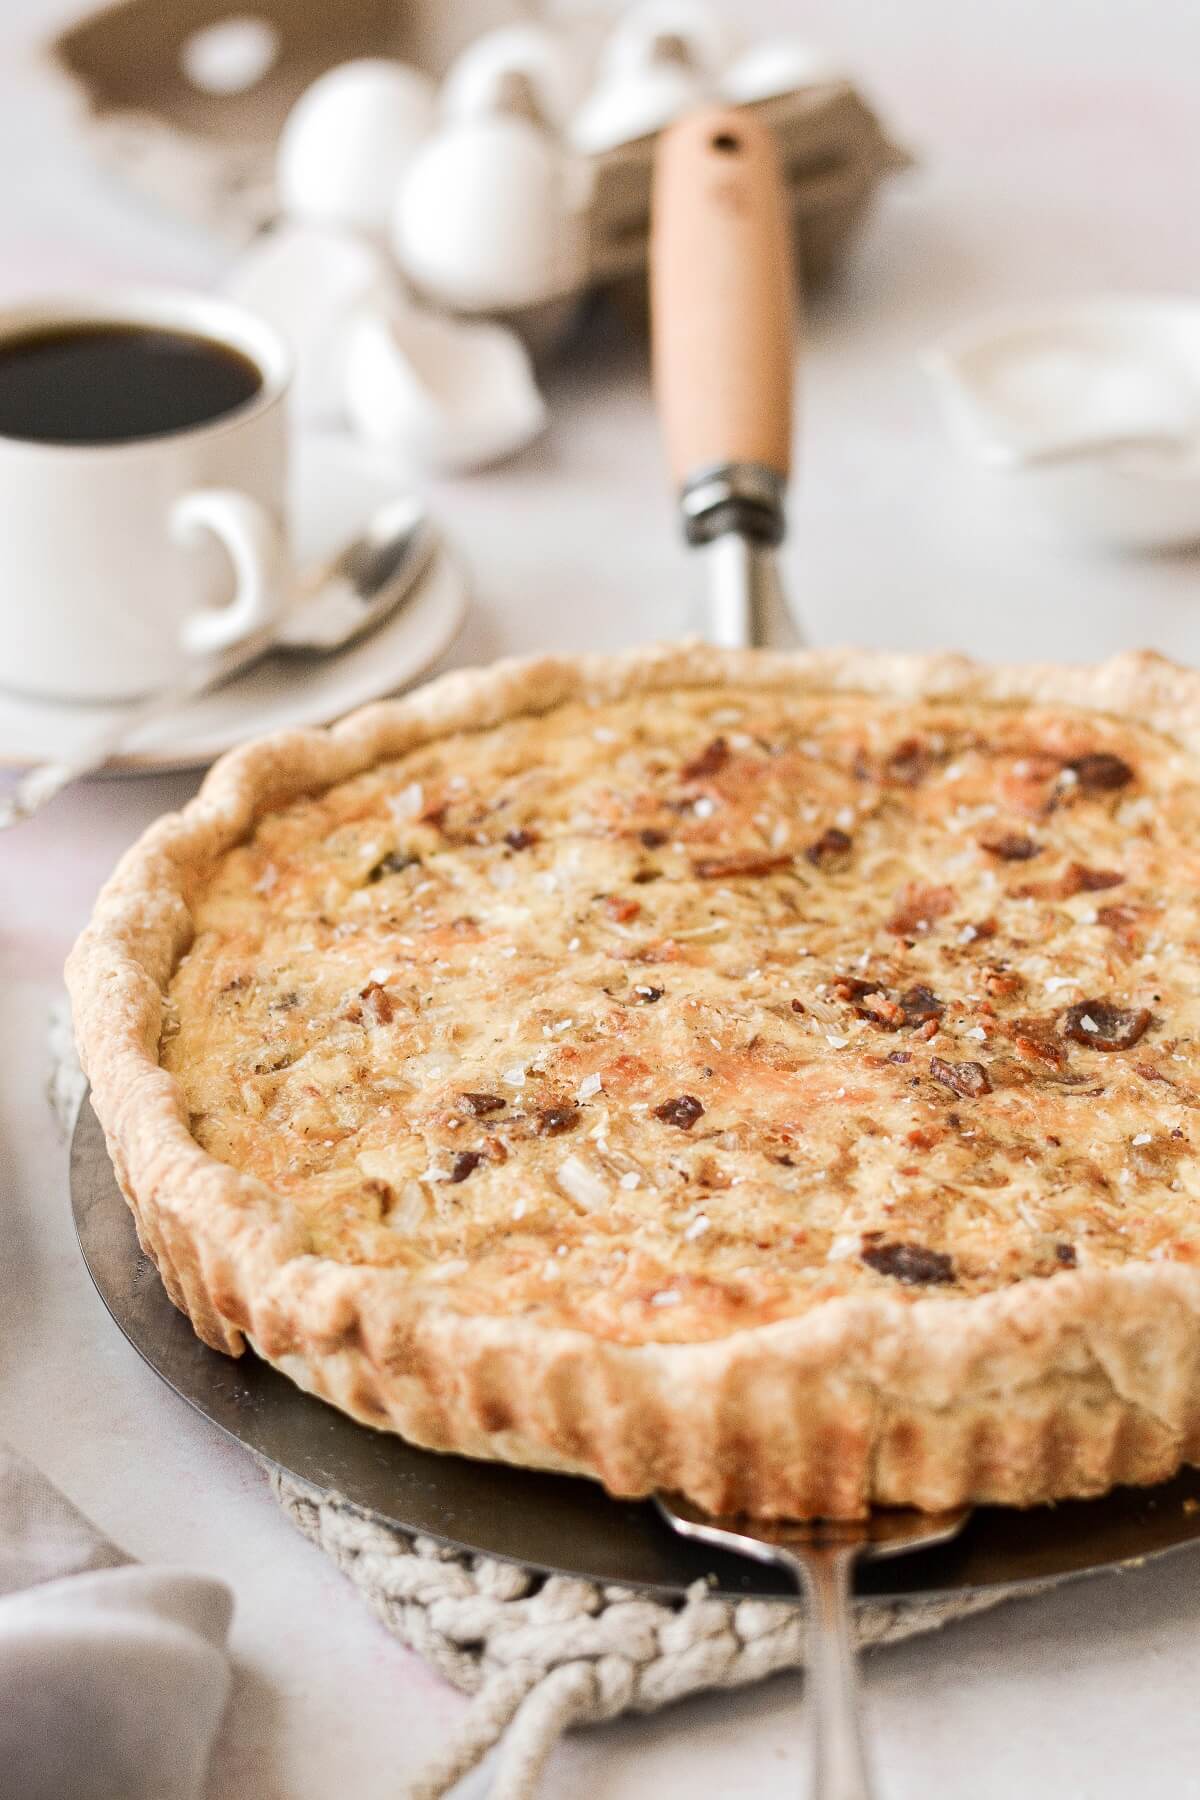 Baked quiche Lorraine next to a cup of coffee.